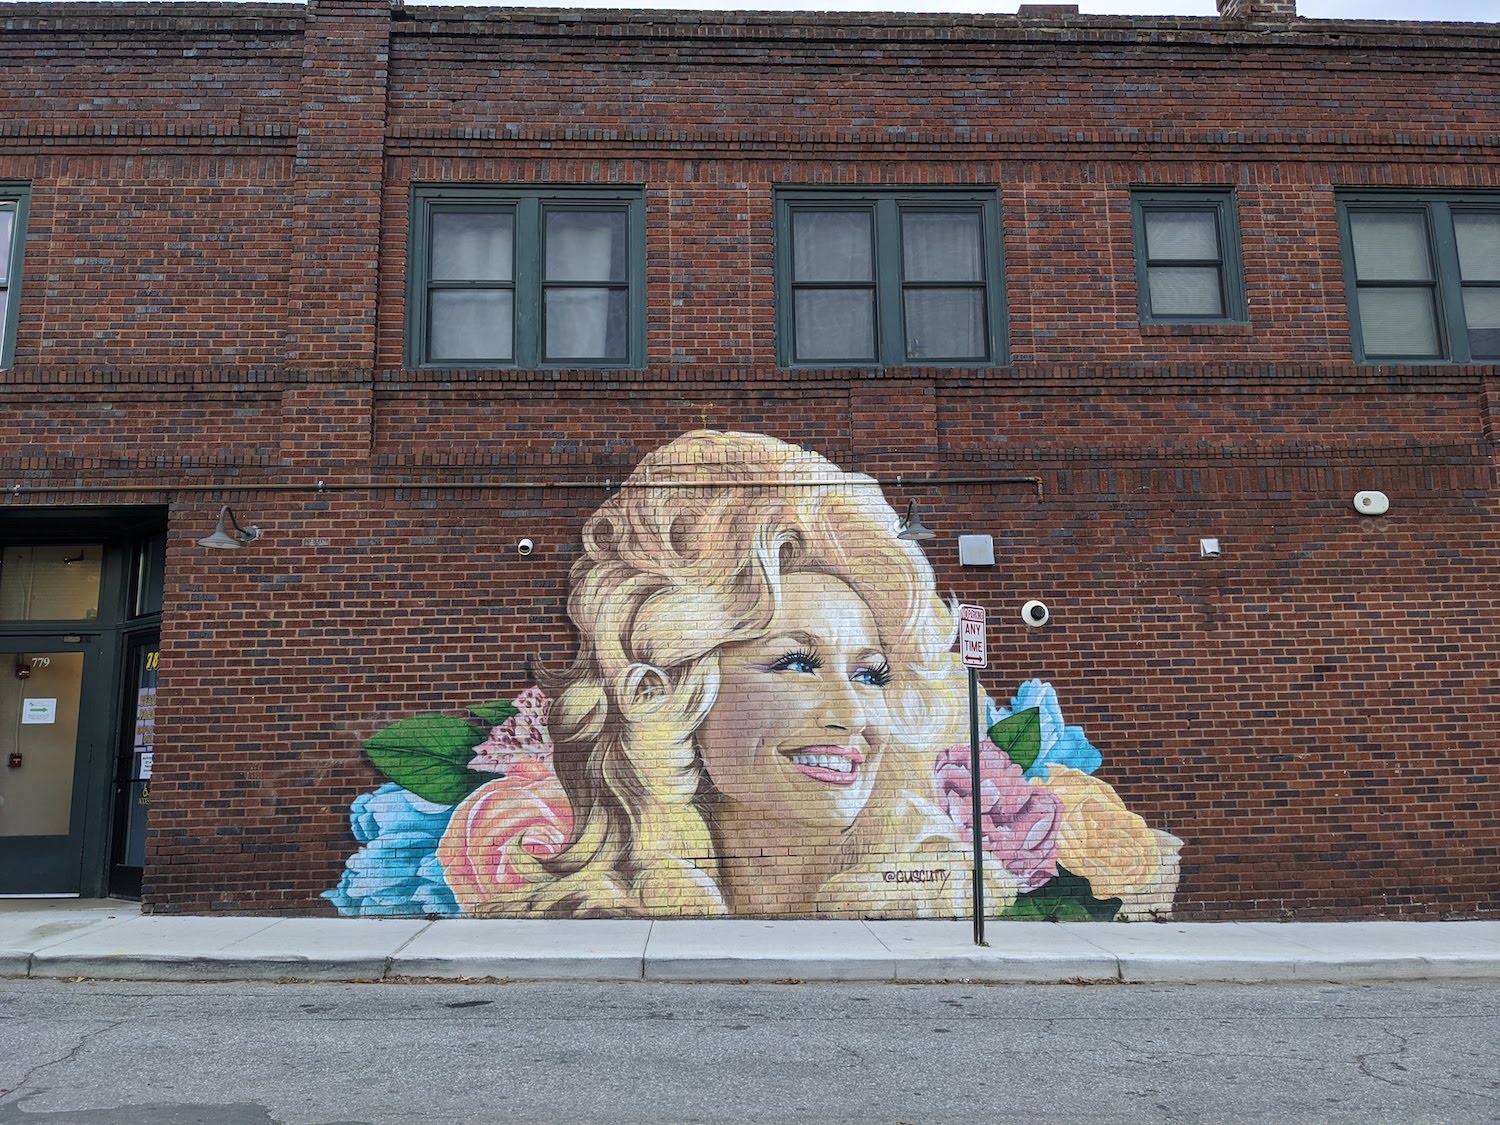 Best Instagram Spots in Asheville: West Asheville mural of Dolly Parton by Gus Cutty